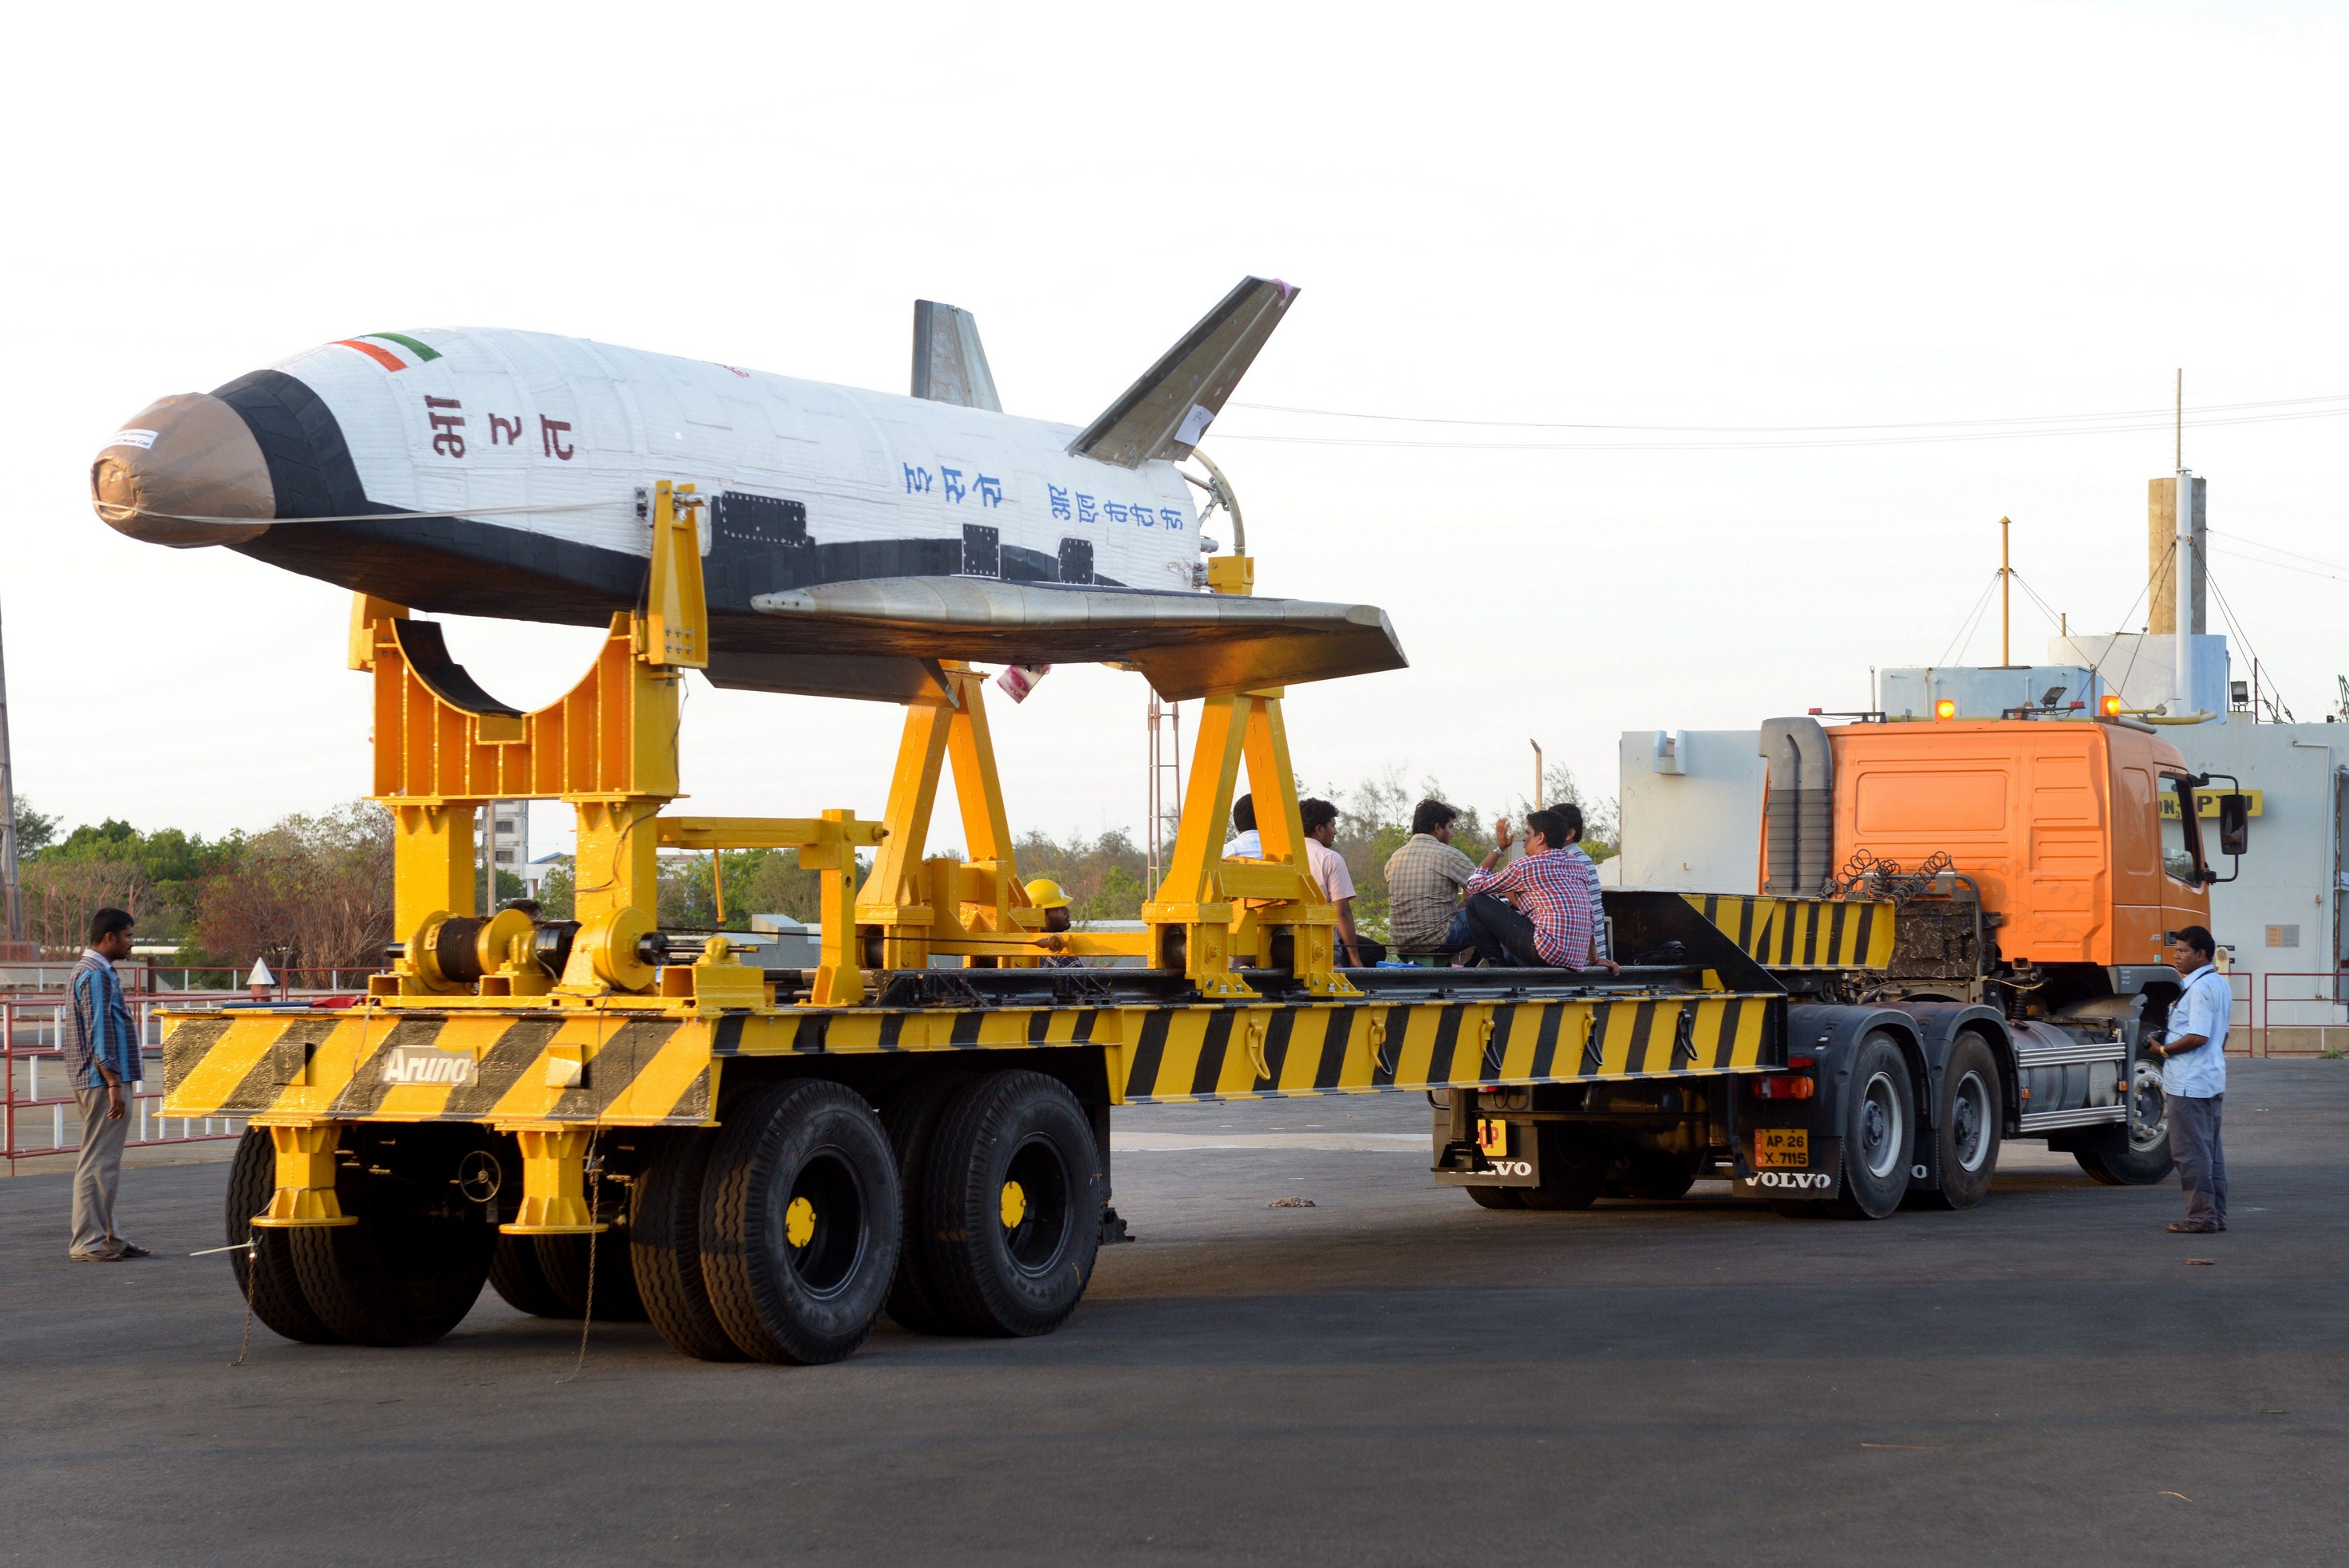 Meet India's 1st Space Plane